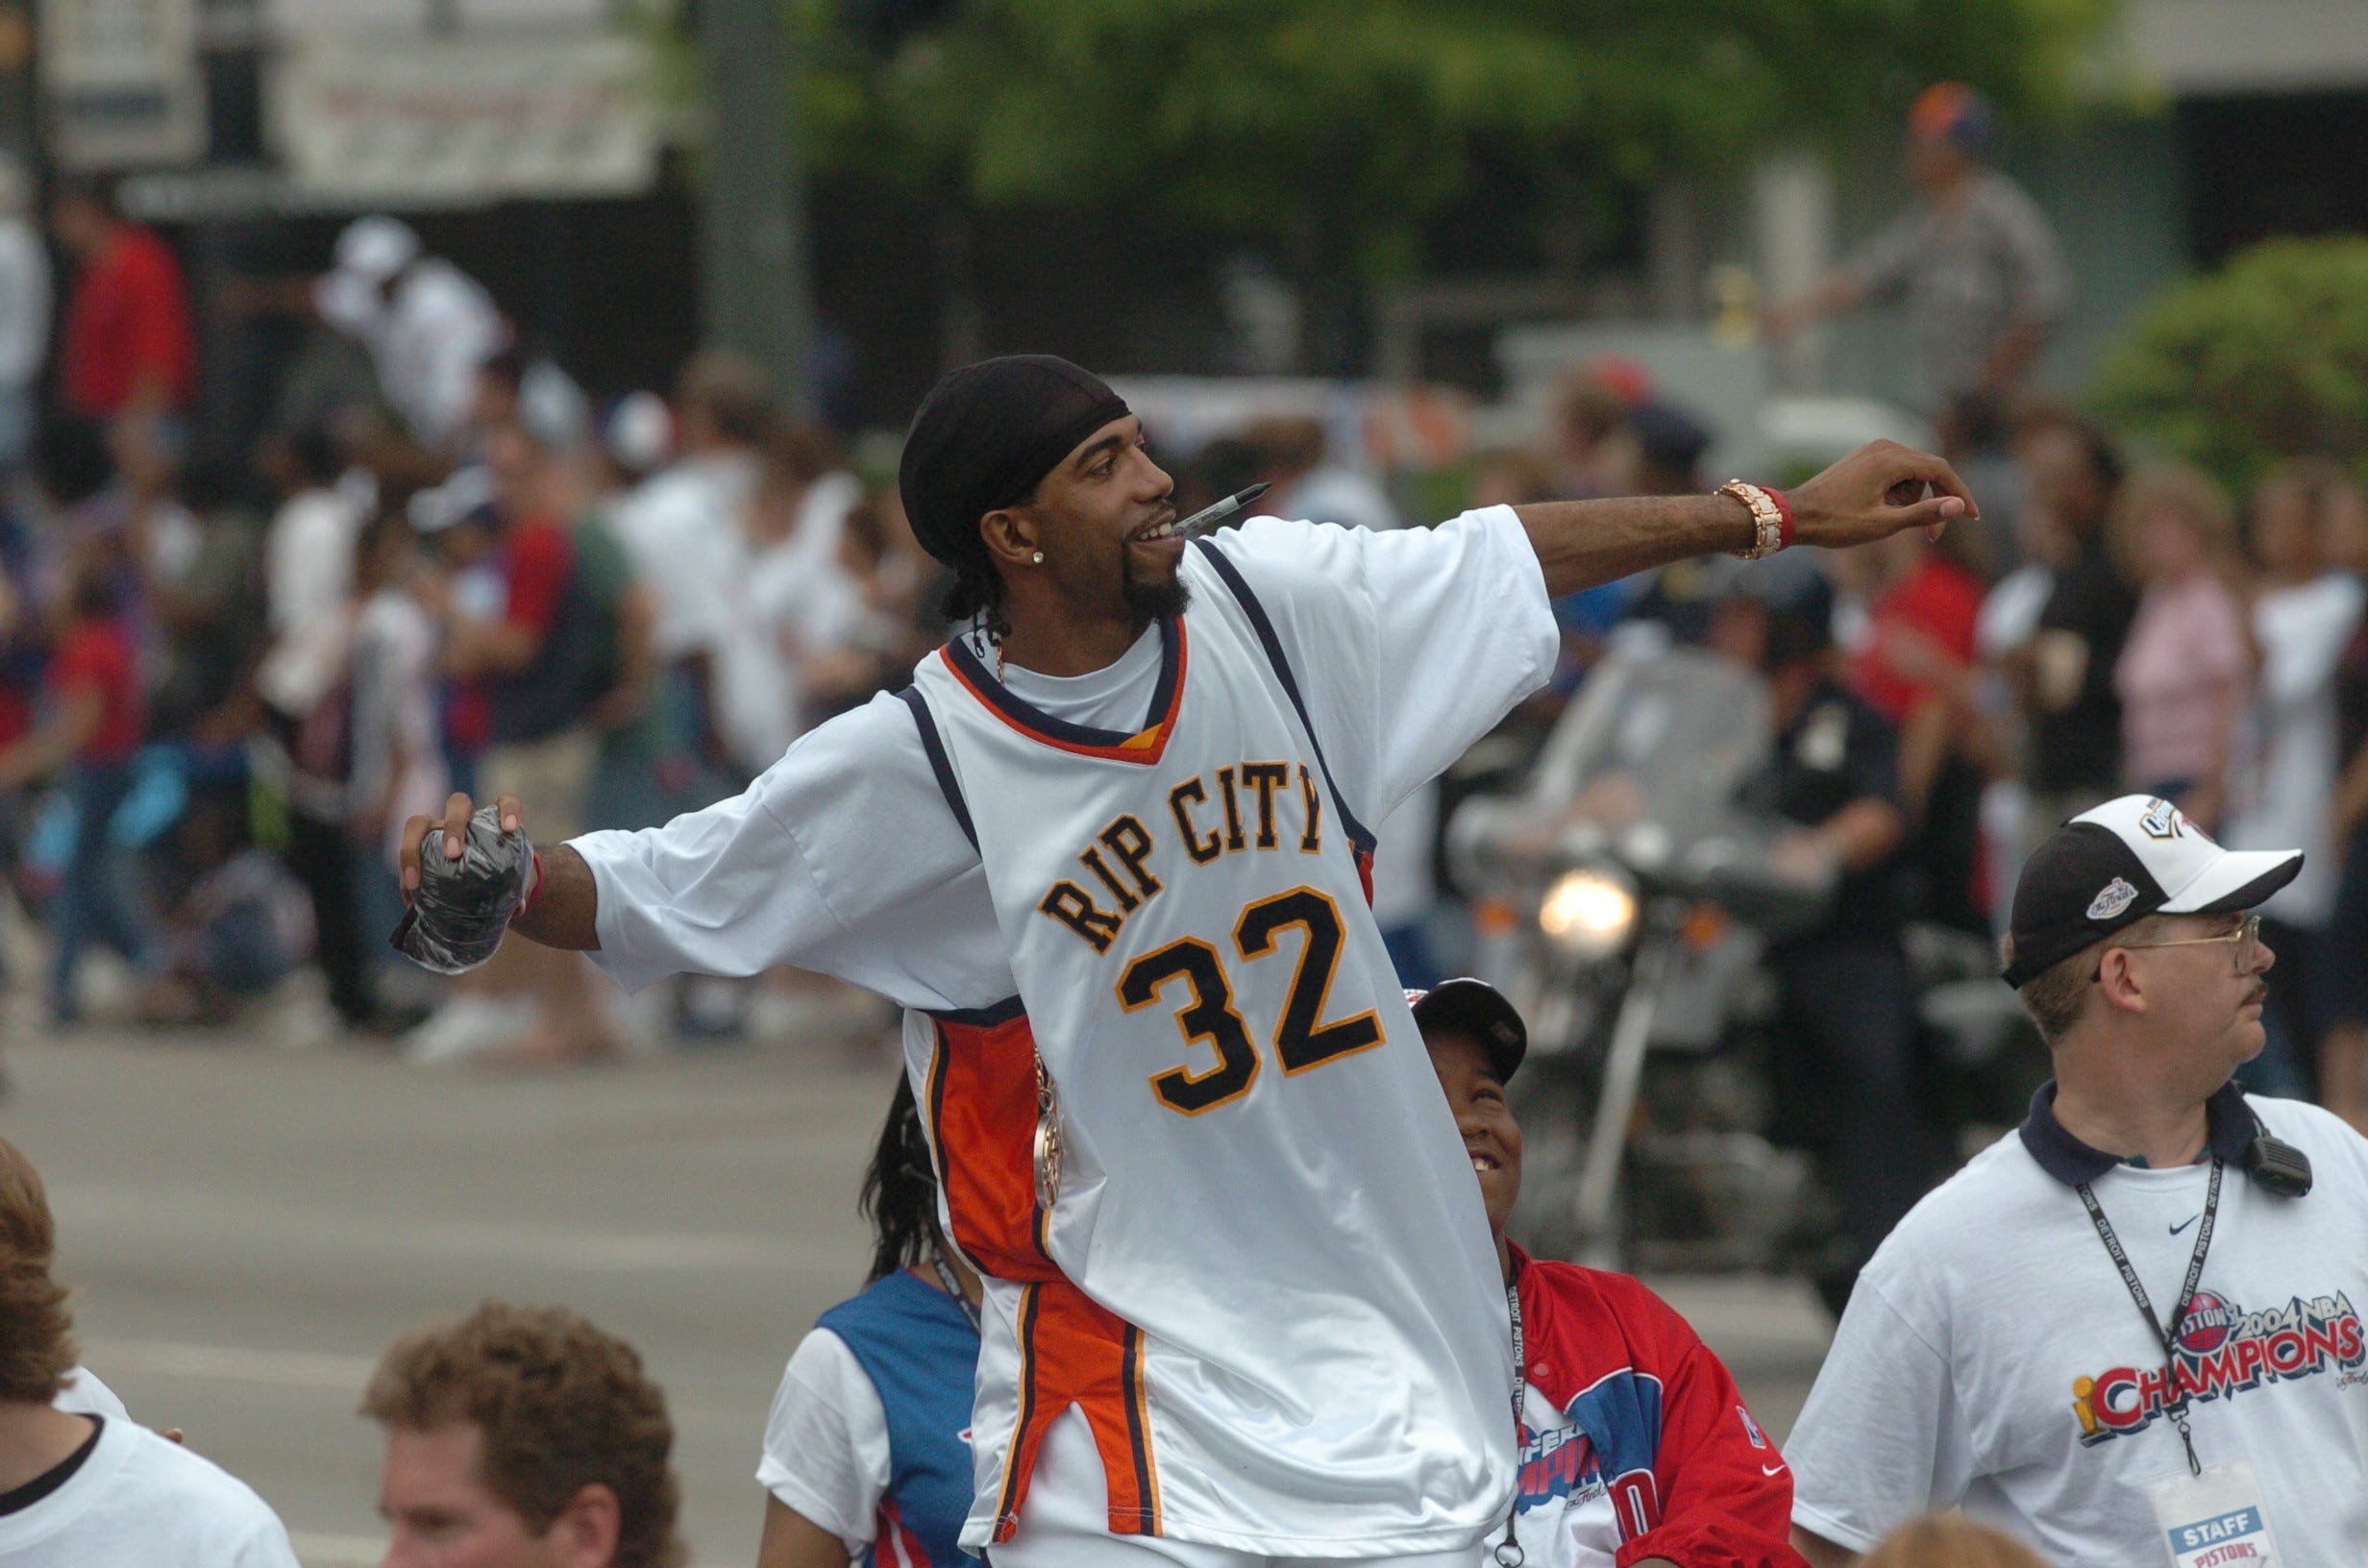 Detroit's Richard Hamilton tosses one of many personally-signed T-shirts into the crowd during the Detroit Pistons victory parade.